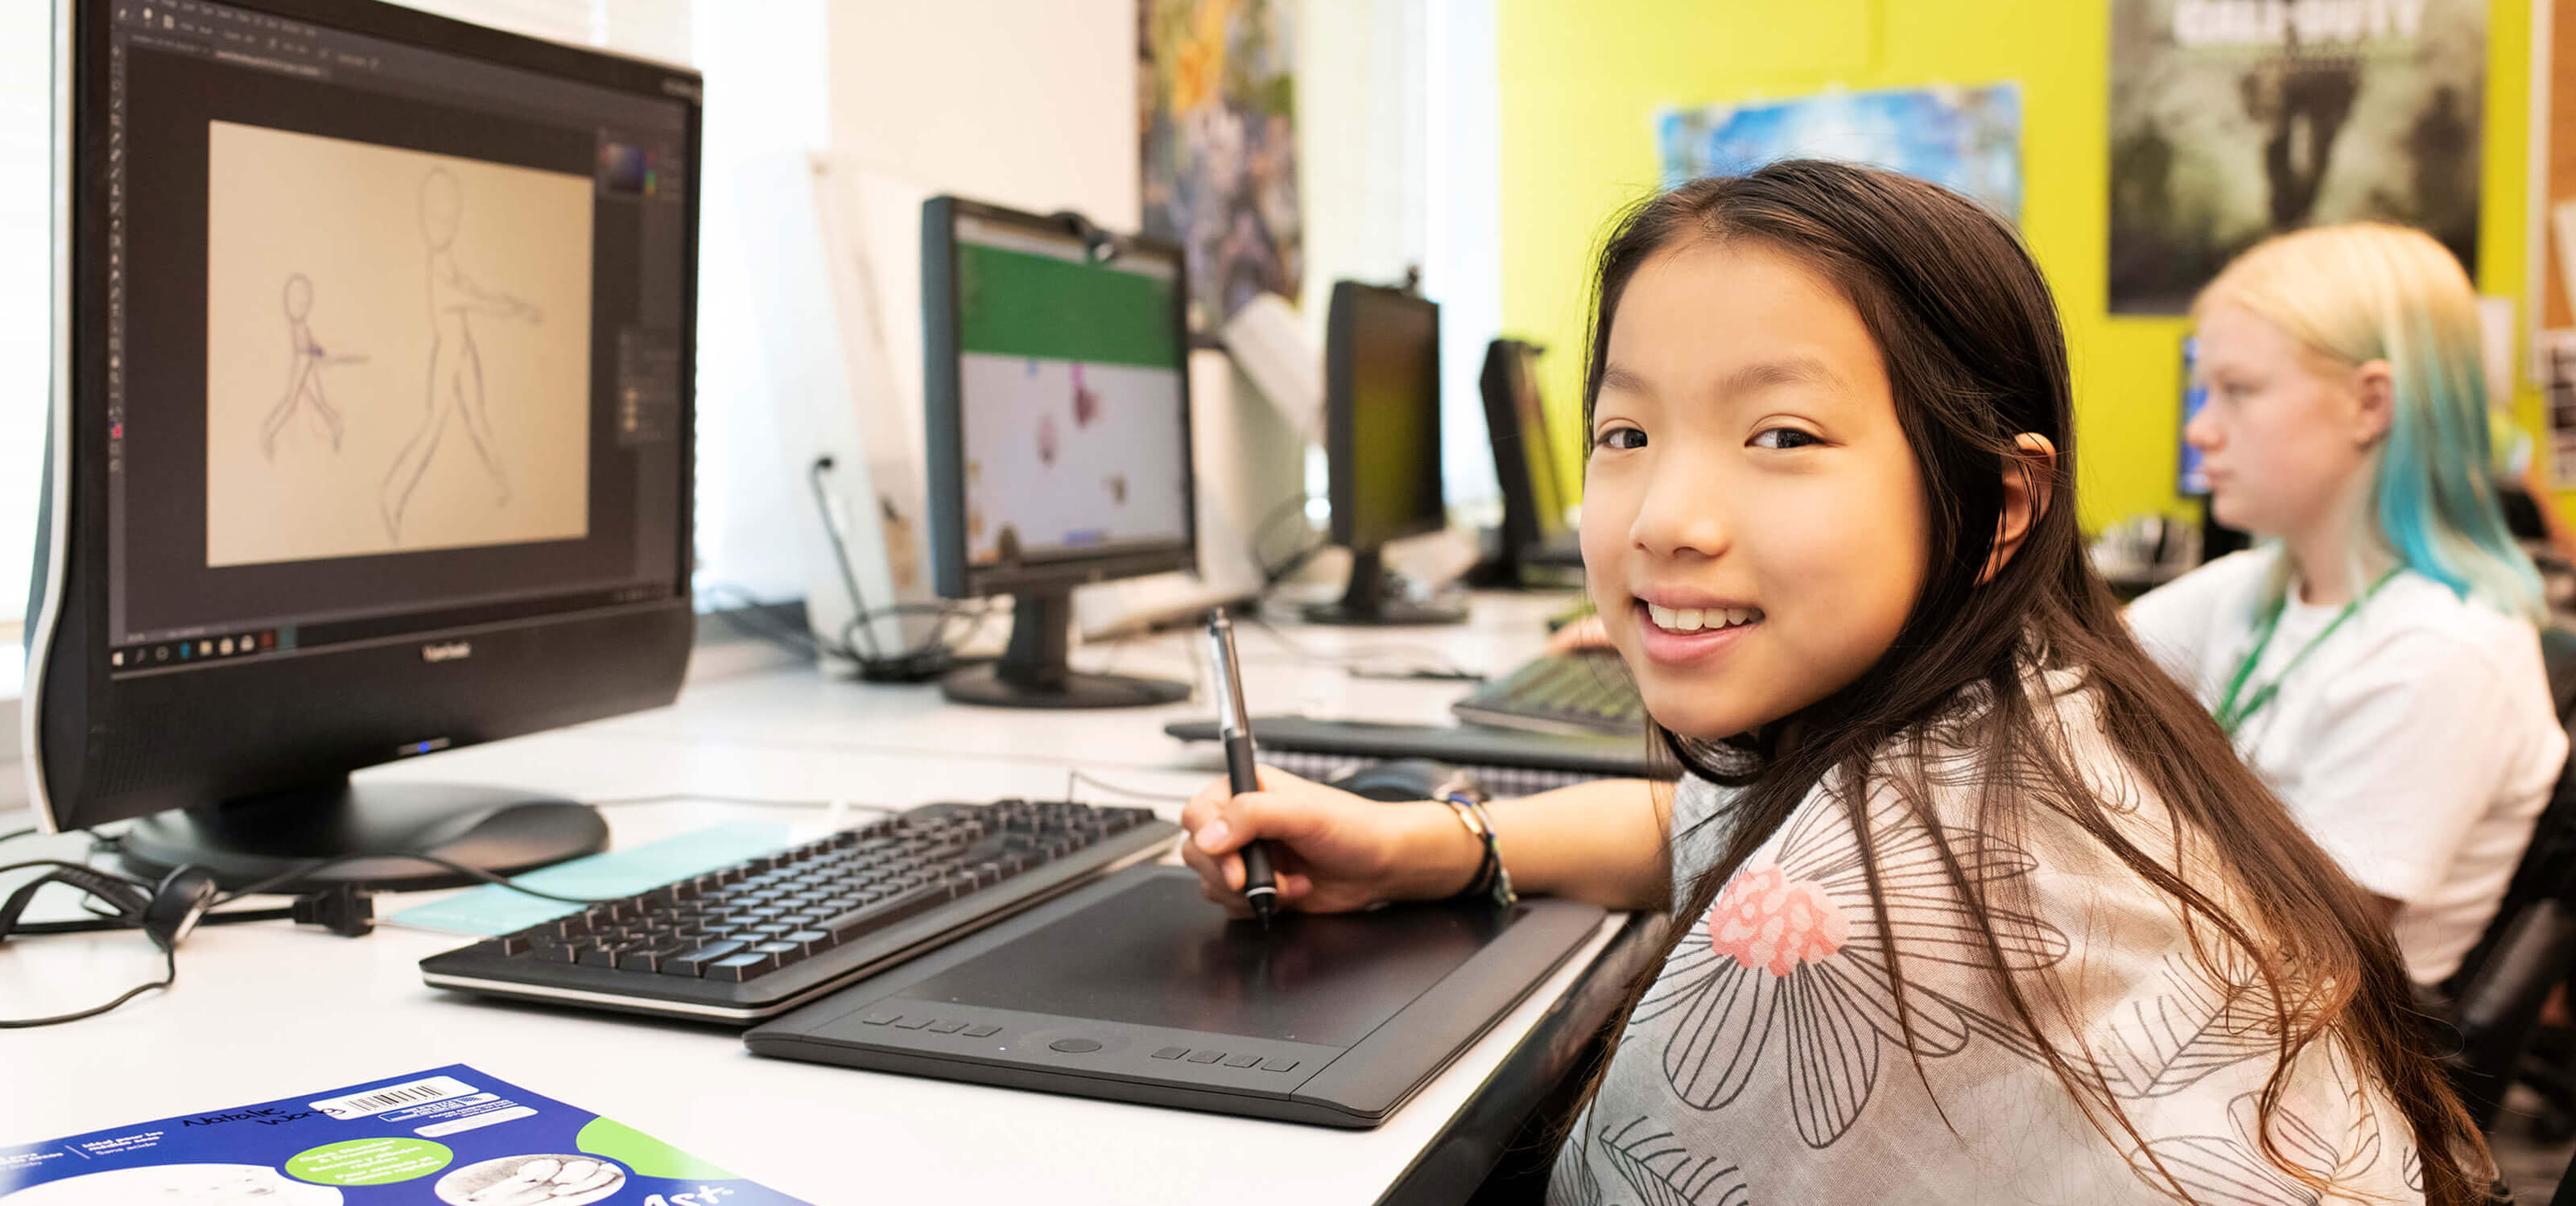 A young DigiPen Academy student smiling as she sits at a computer in a classroom at the DigiPen campus